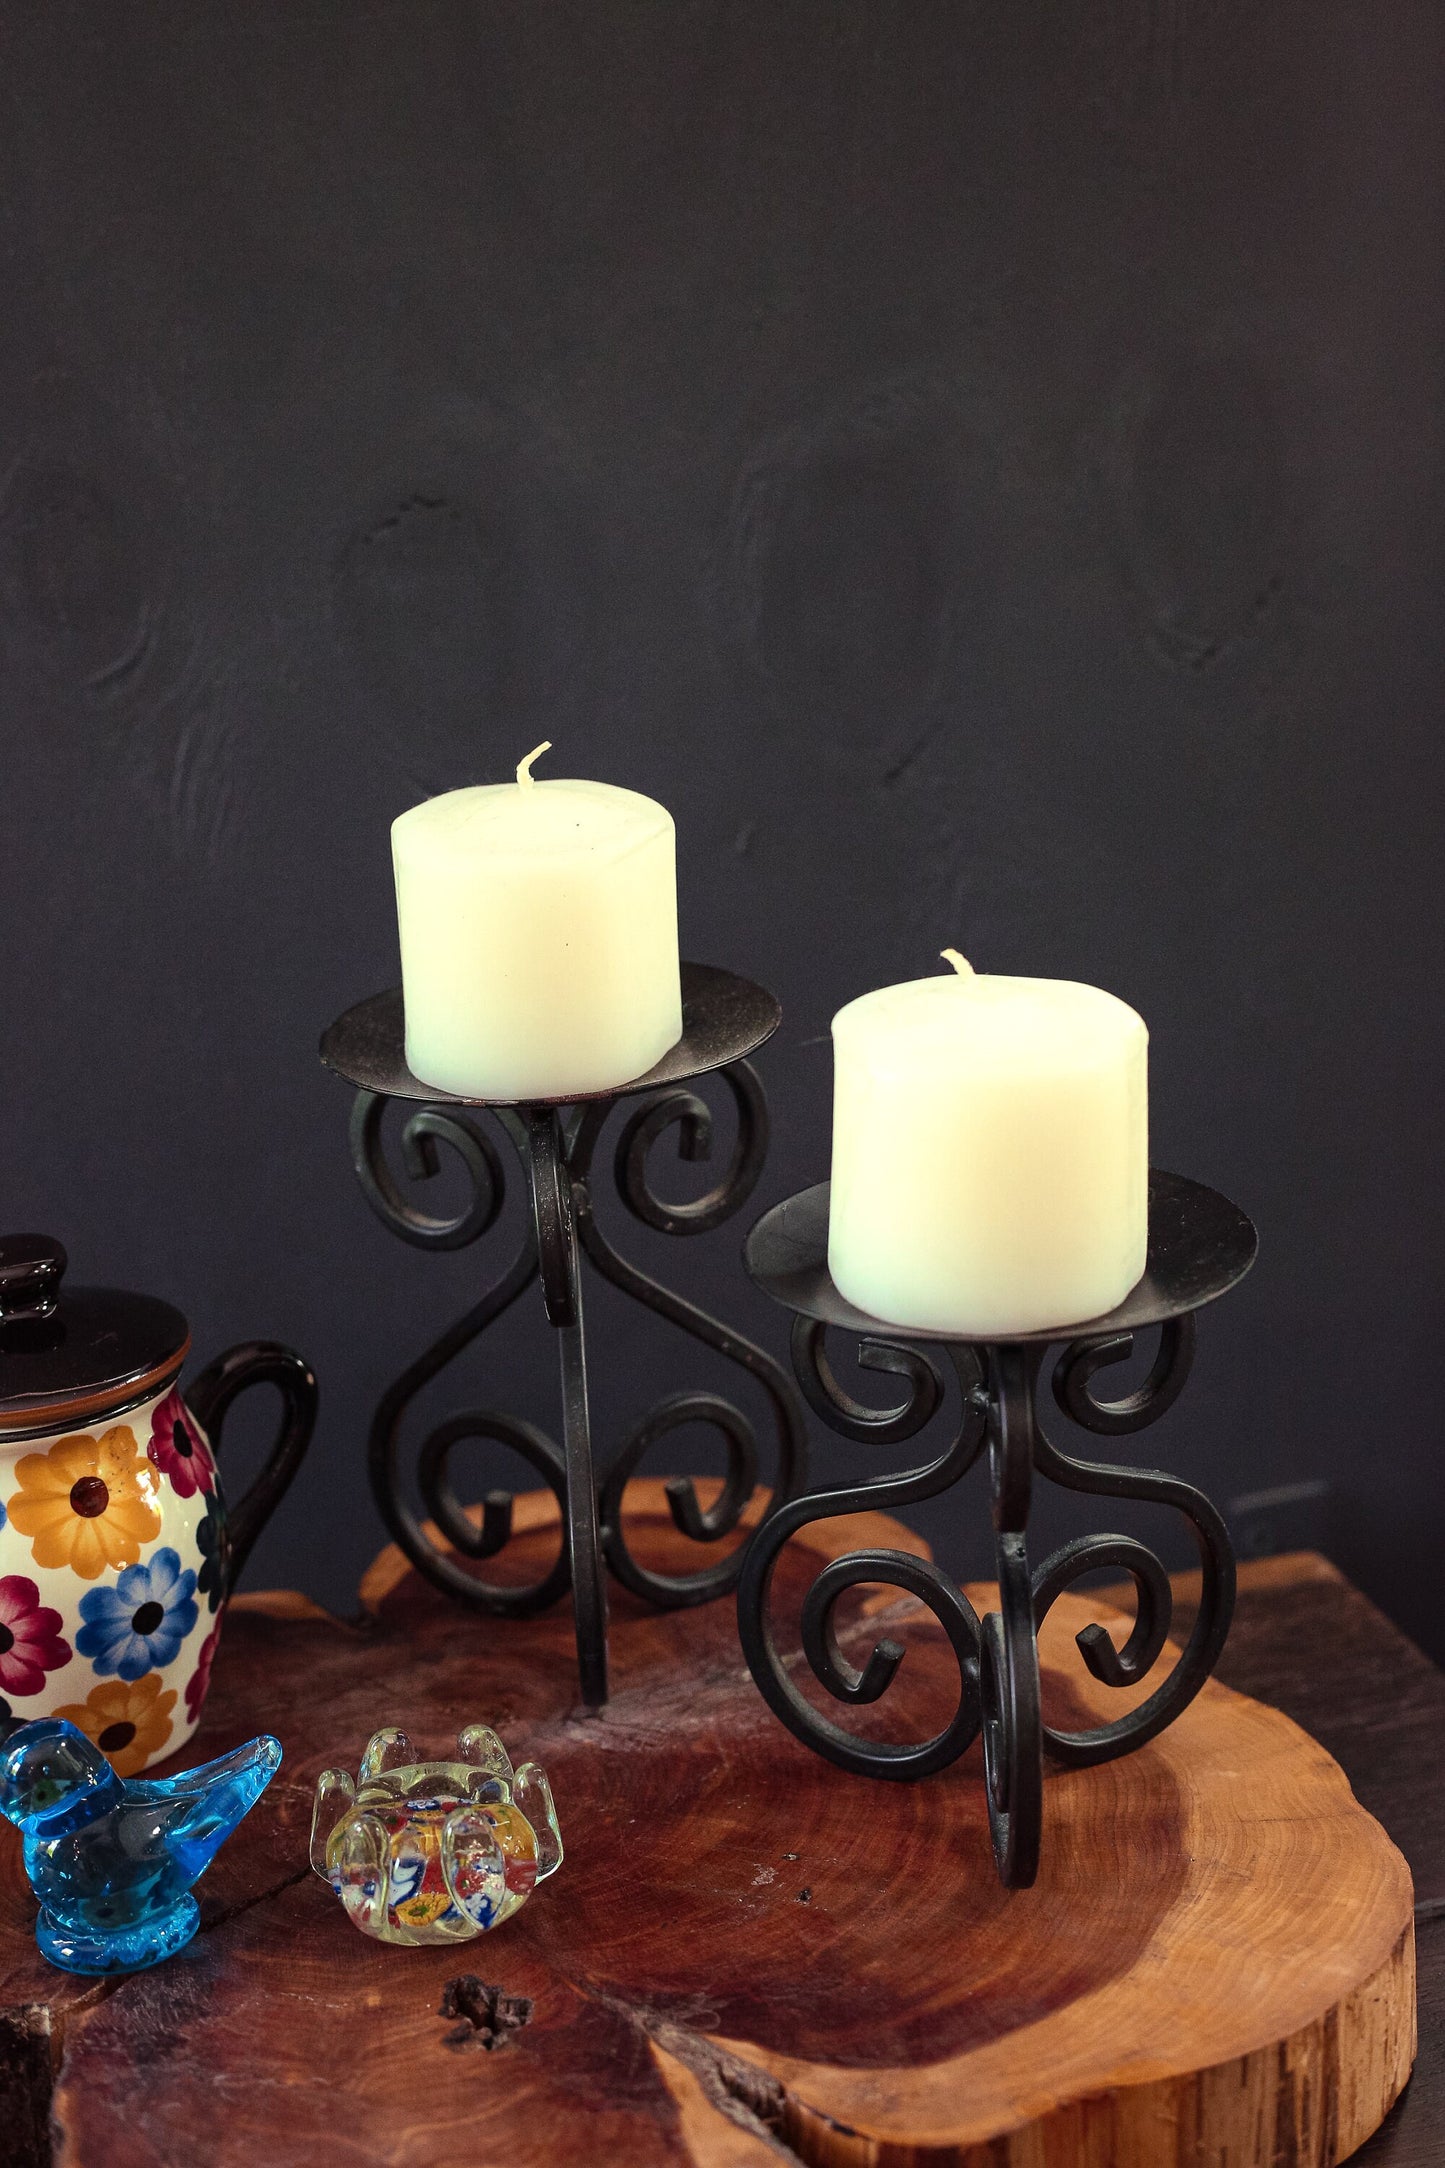 Pair of Black Metal Pillar Candle Bases - Vintage Black Iron Scroll Candle Holder